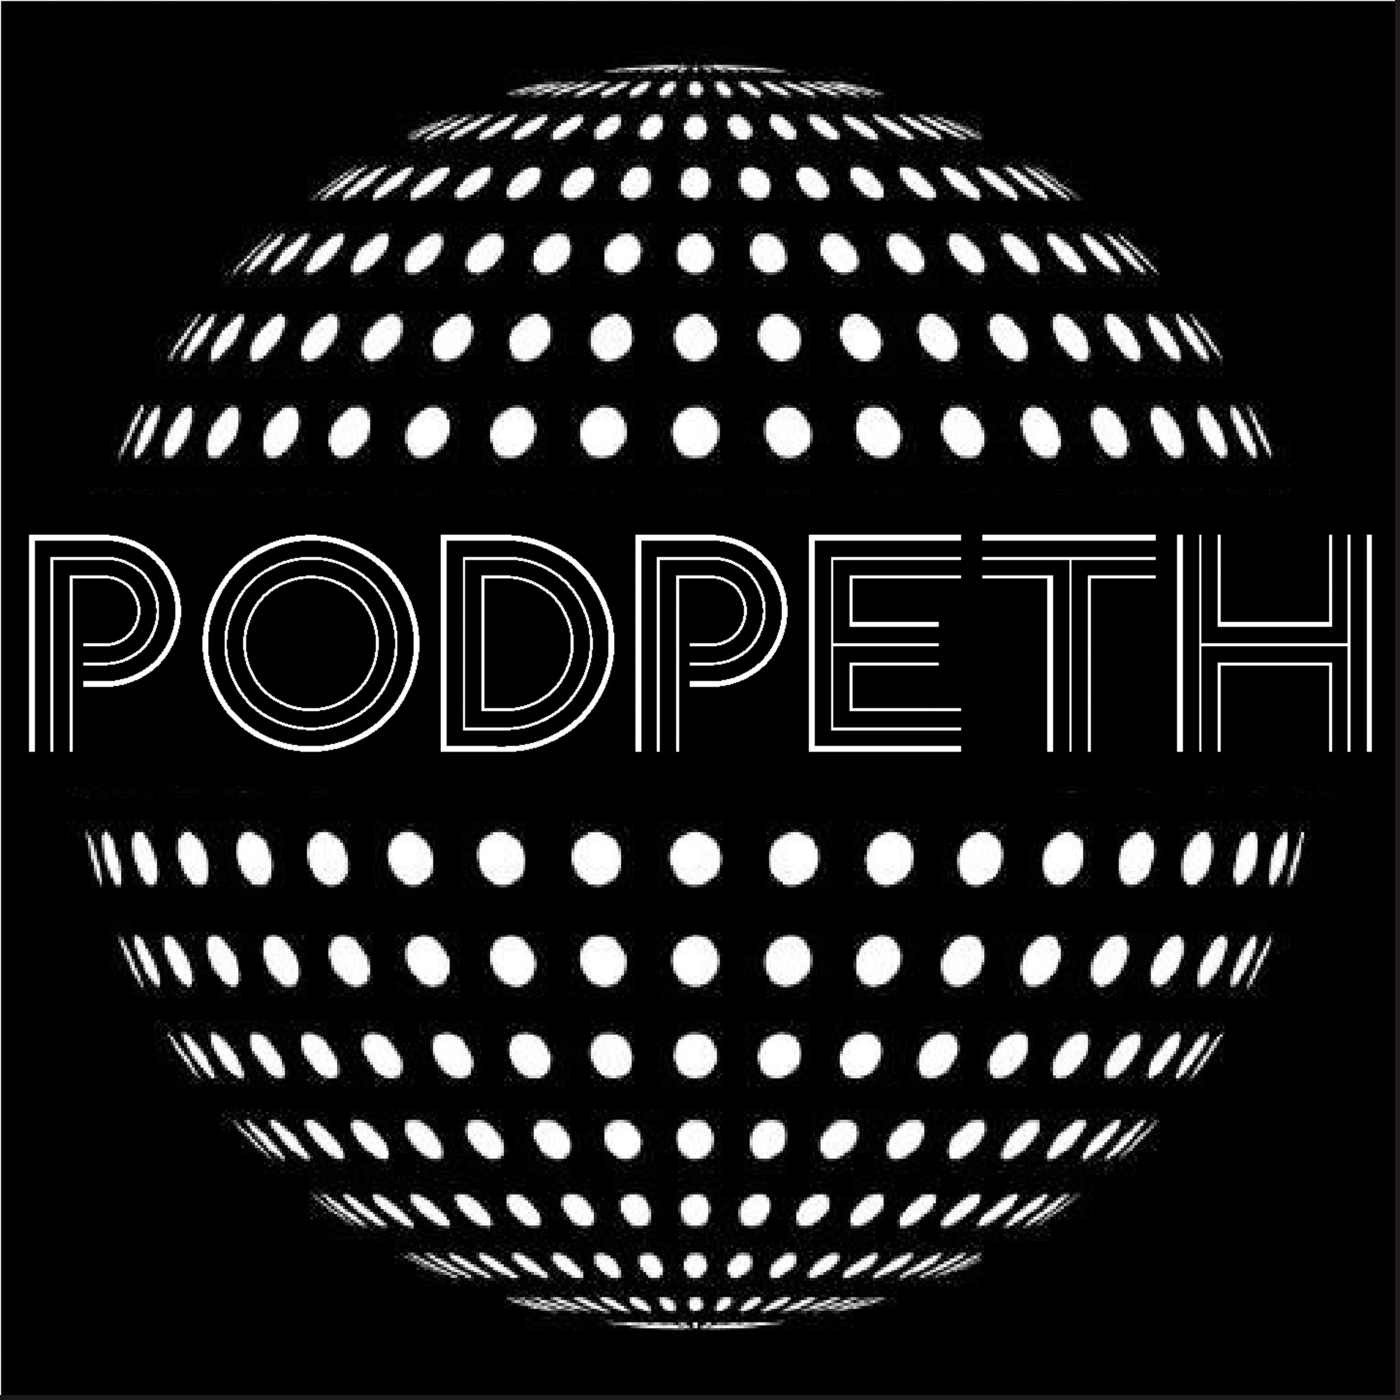 Podpeth #10 - Grab her by the Pod